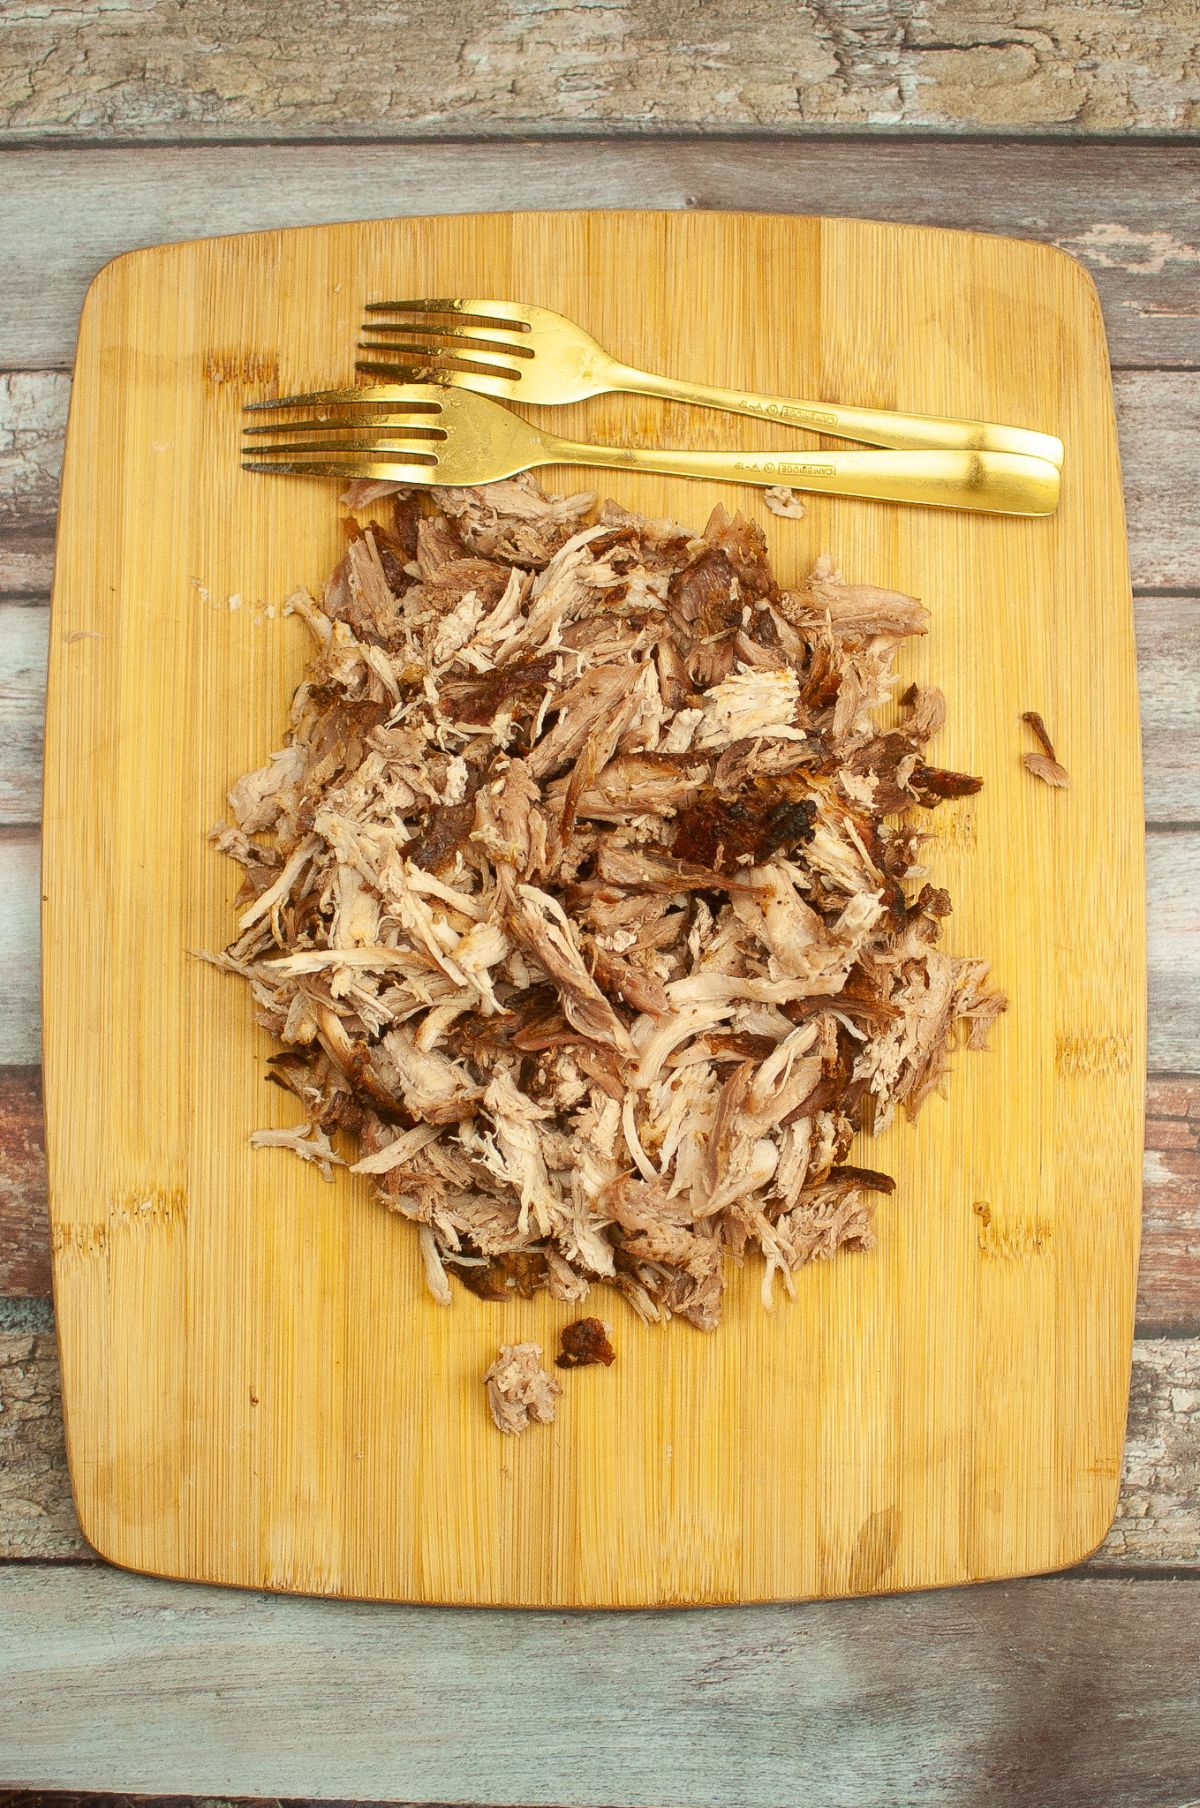 Shredded pork on a wooden board with two forks on the side.